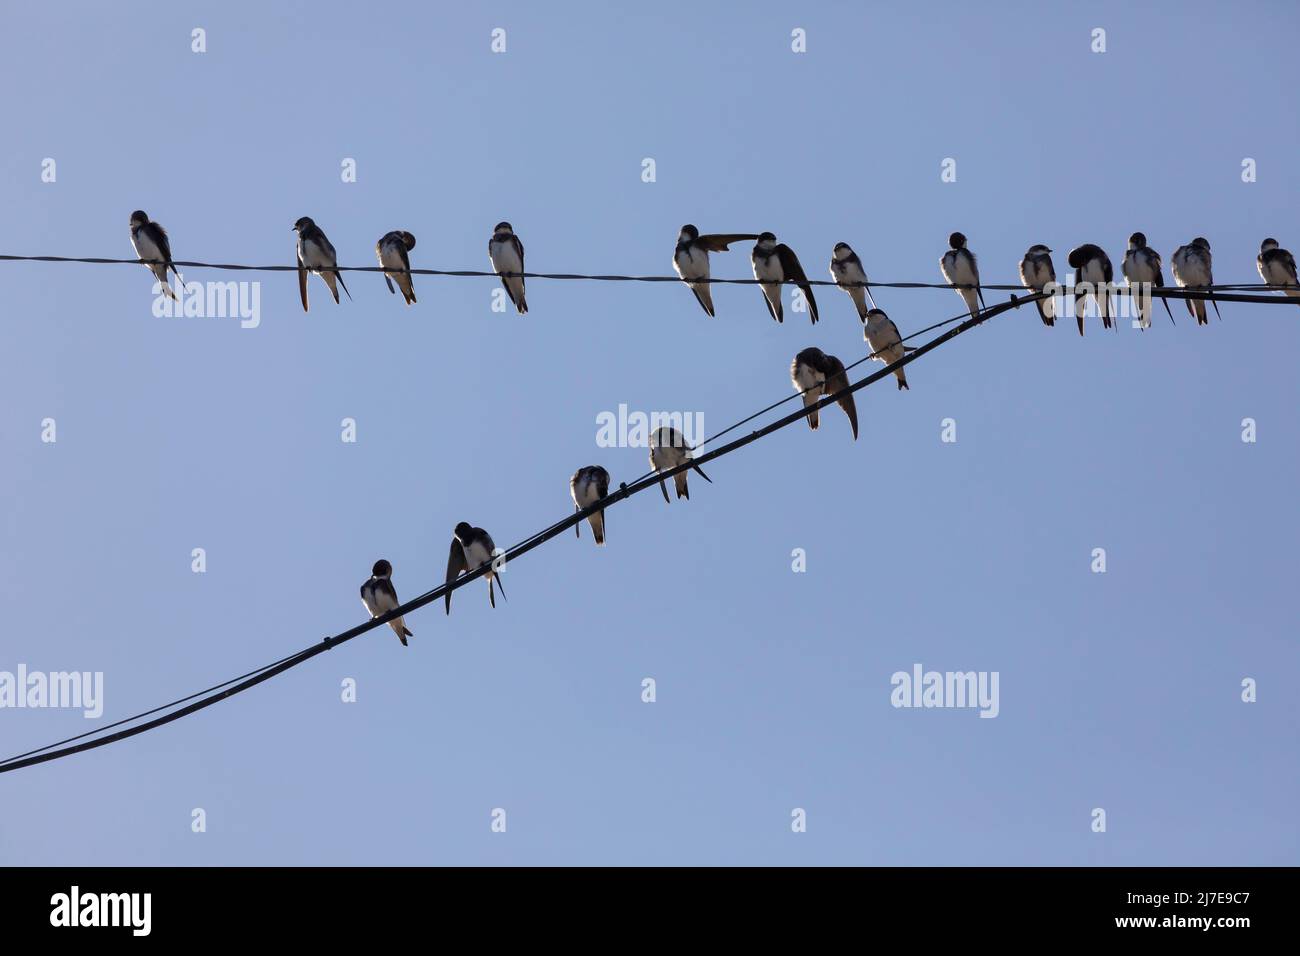 Part of a large flock of House Martins, Delichon urbicum, on a wire in front of a clear, blue sky. Some are roosting, some are preening and some are t Stock Photo